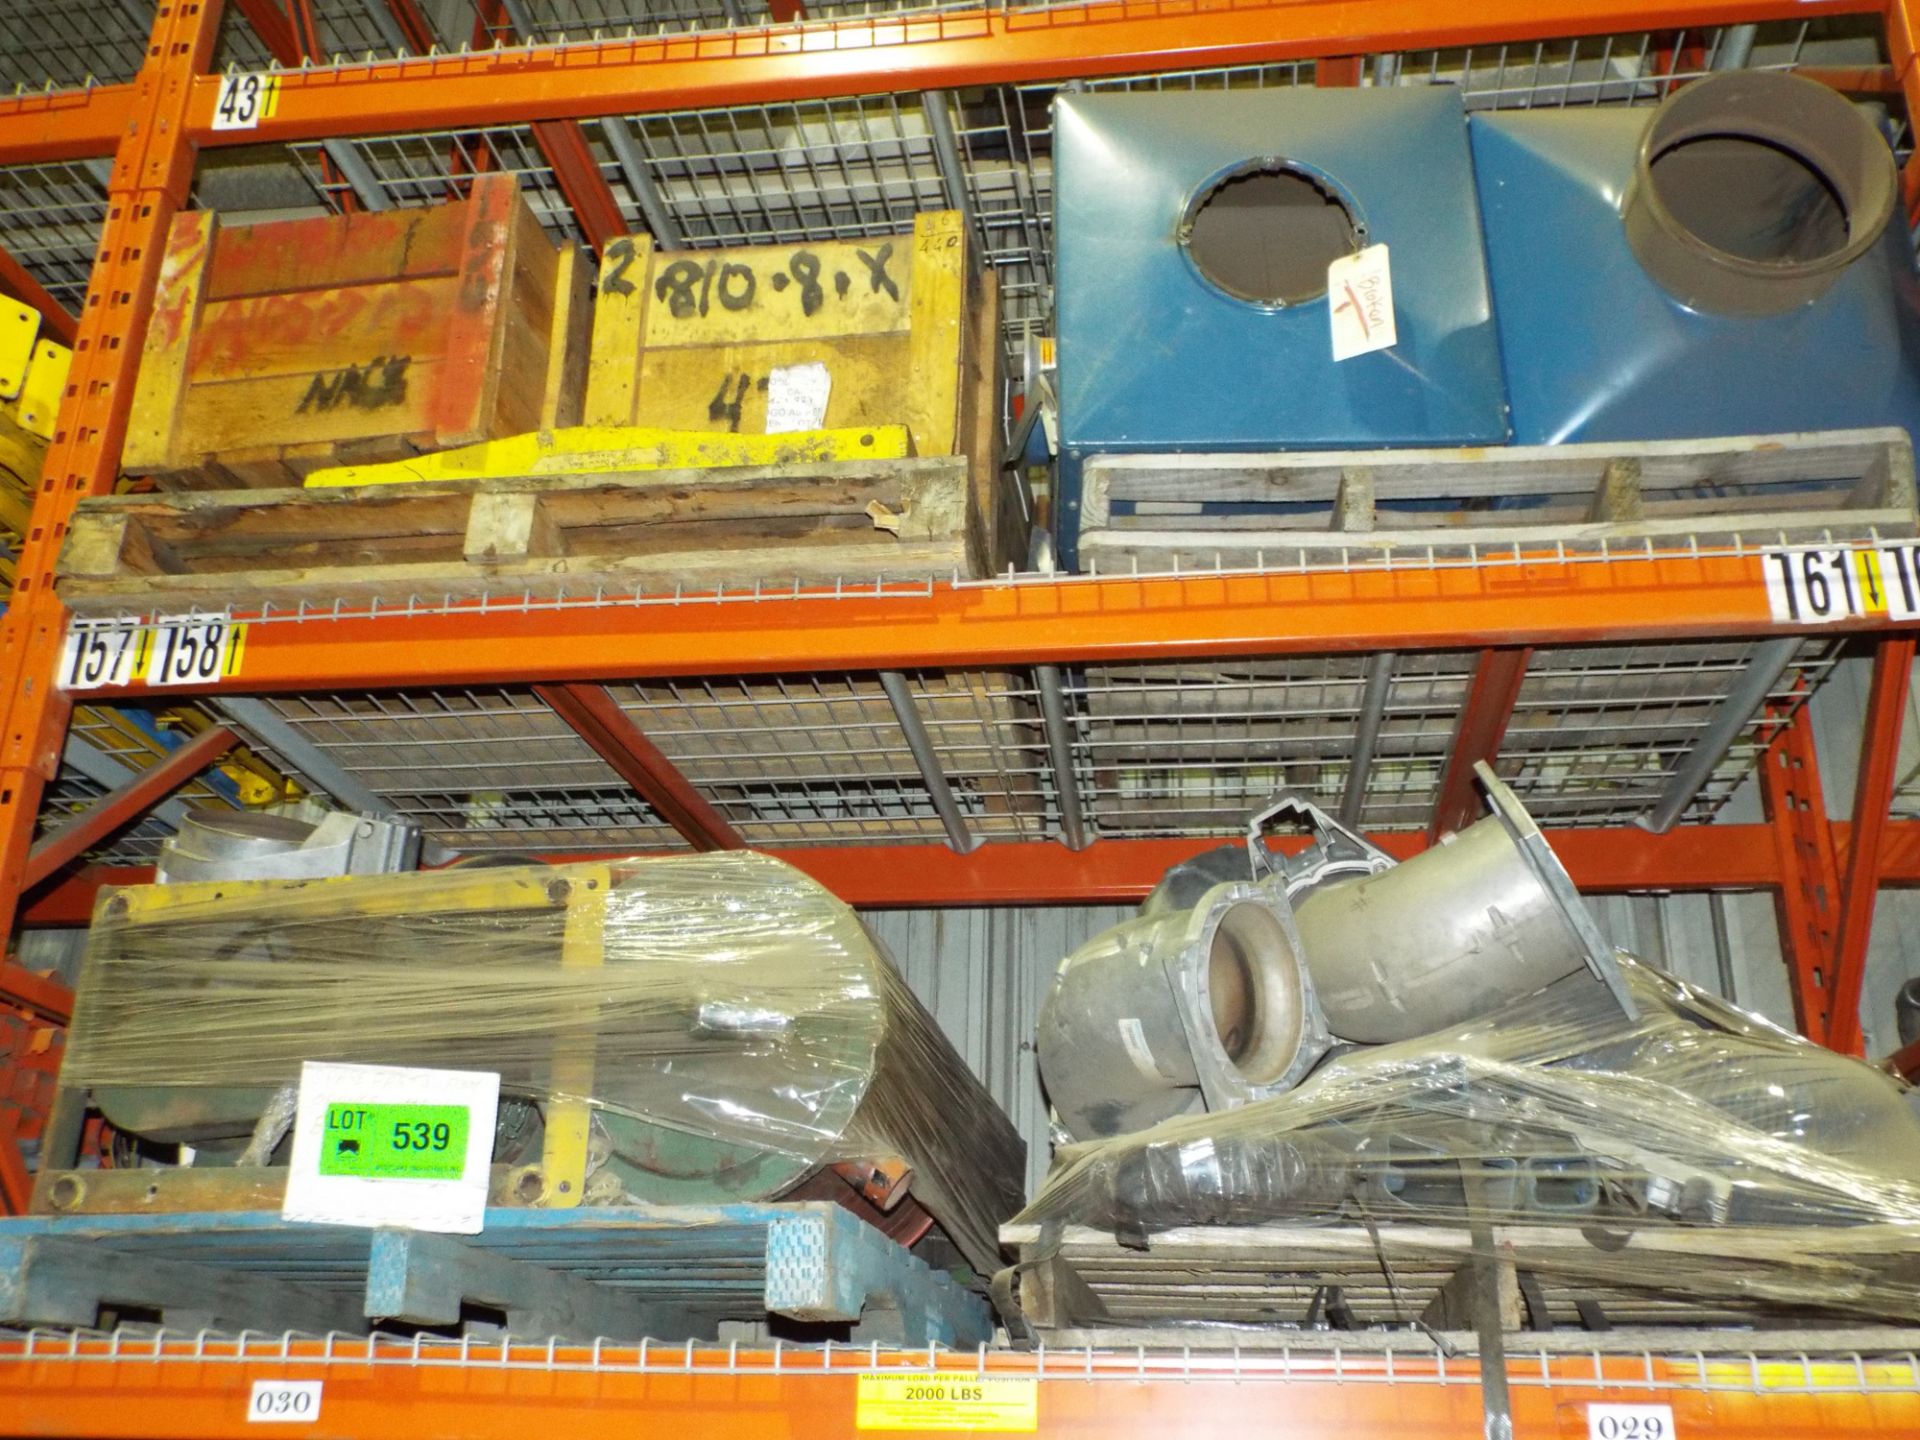 LOT/ CONTENTS OF RACK INCLUDING NEDERMAN PARTS - Image 2 of 3